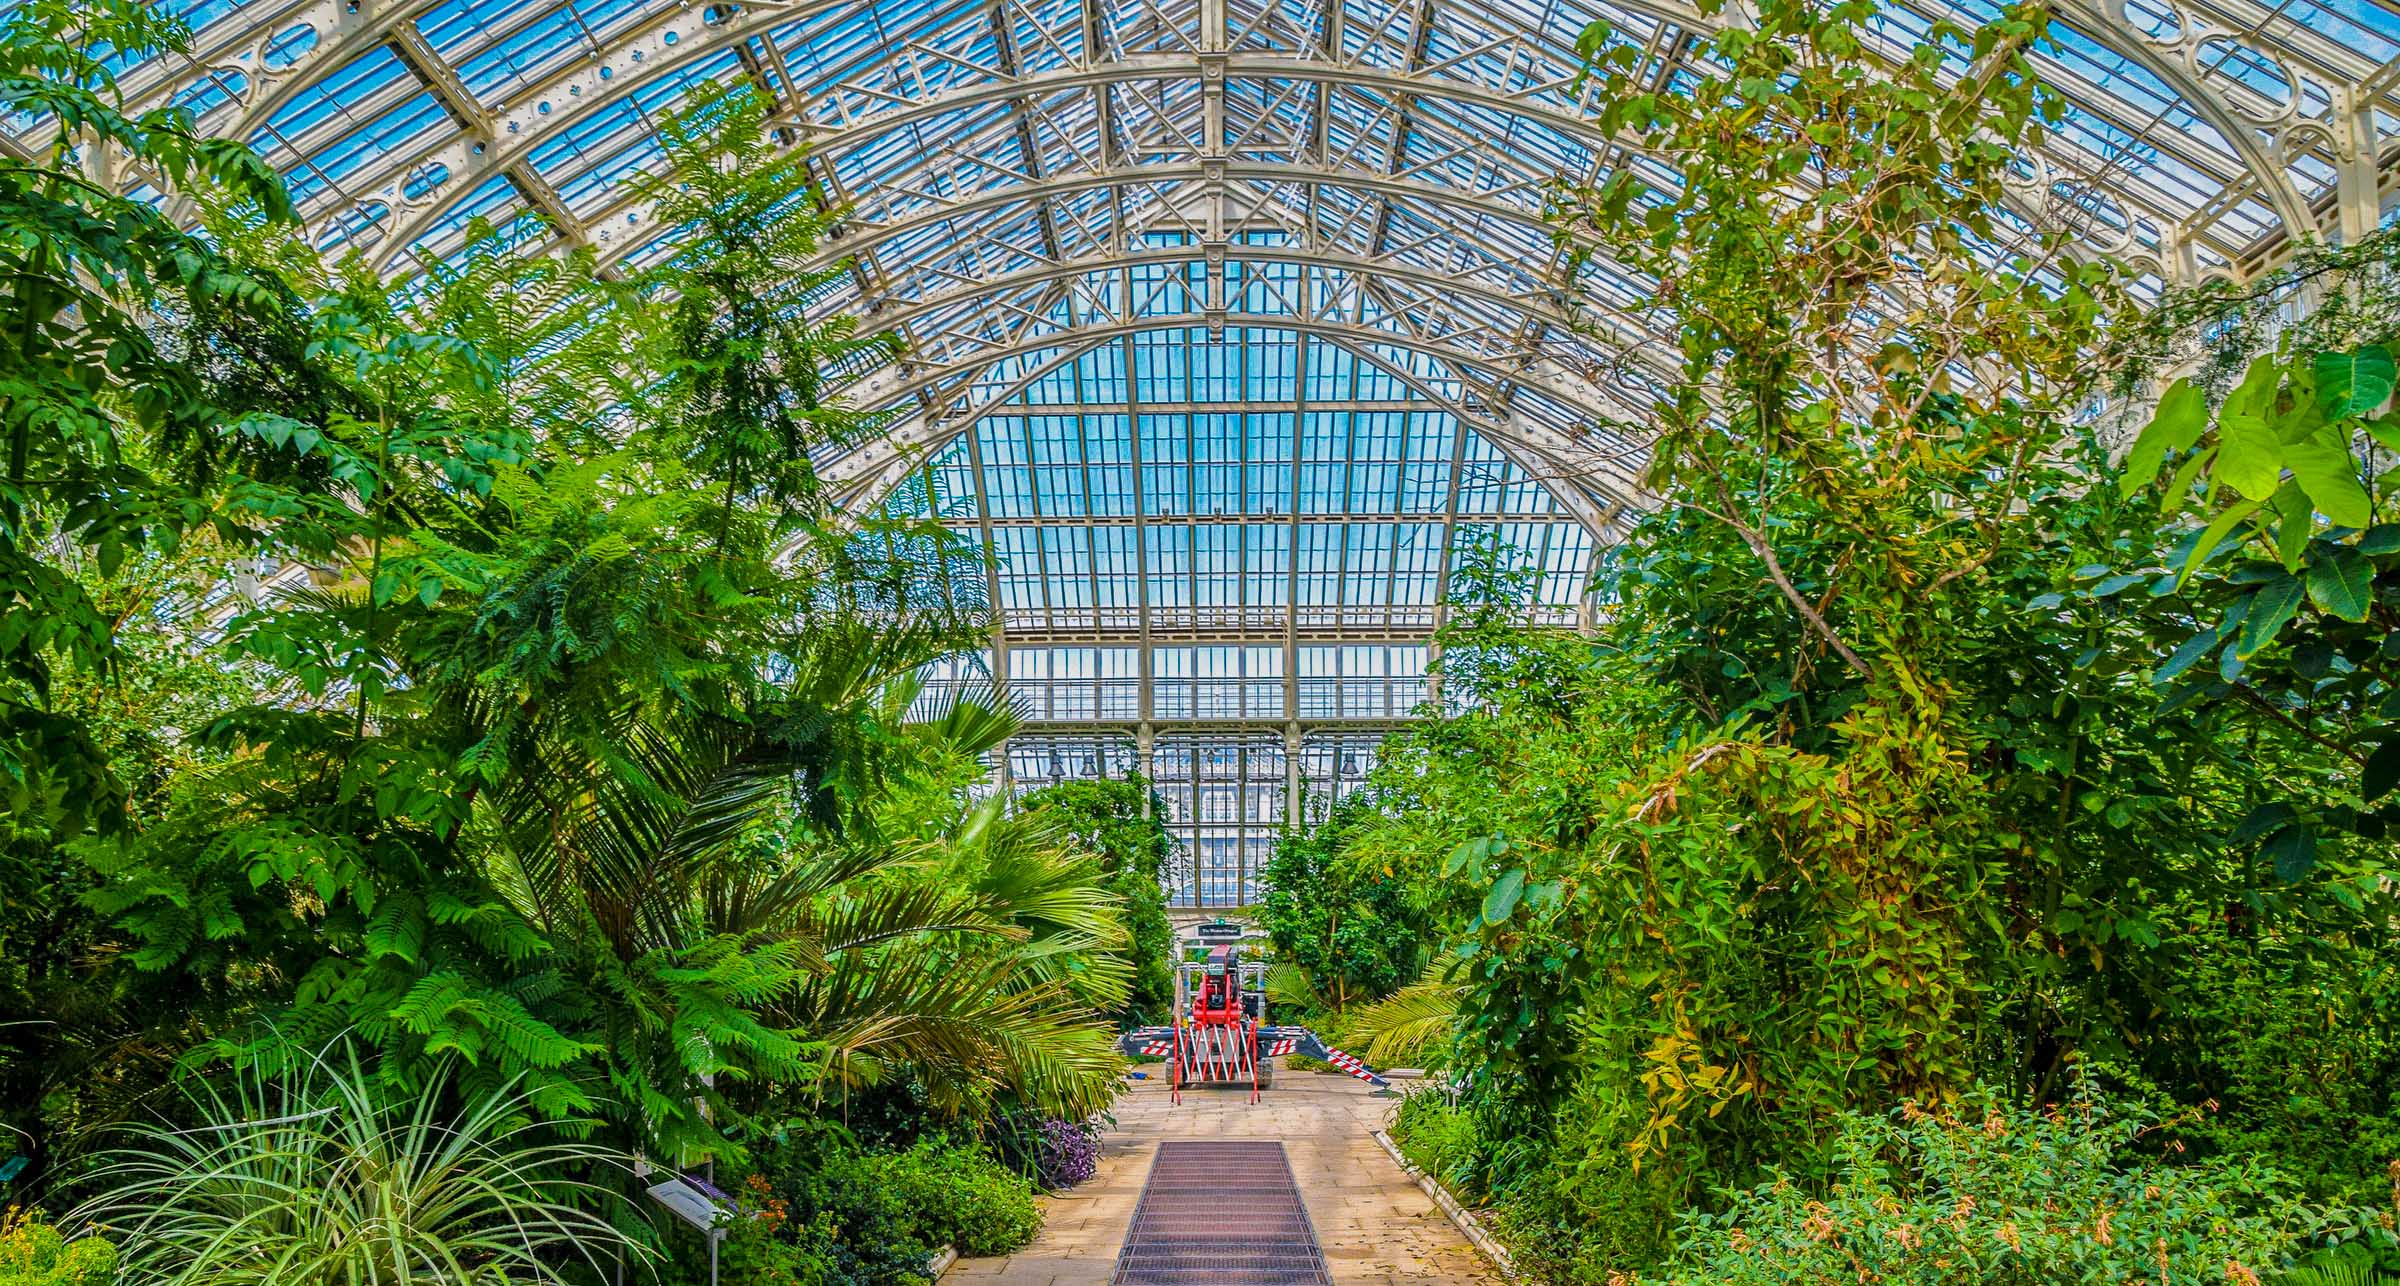 Exploring Botanic Gardens: A Guide to Closing Hours and Tips for a Peaceful Evening Stroll